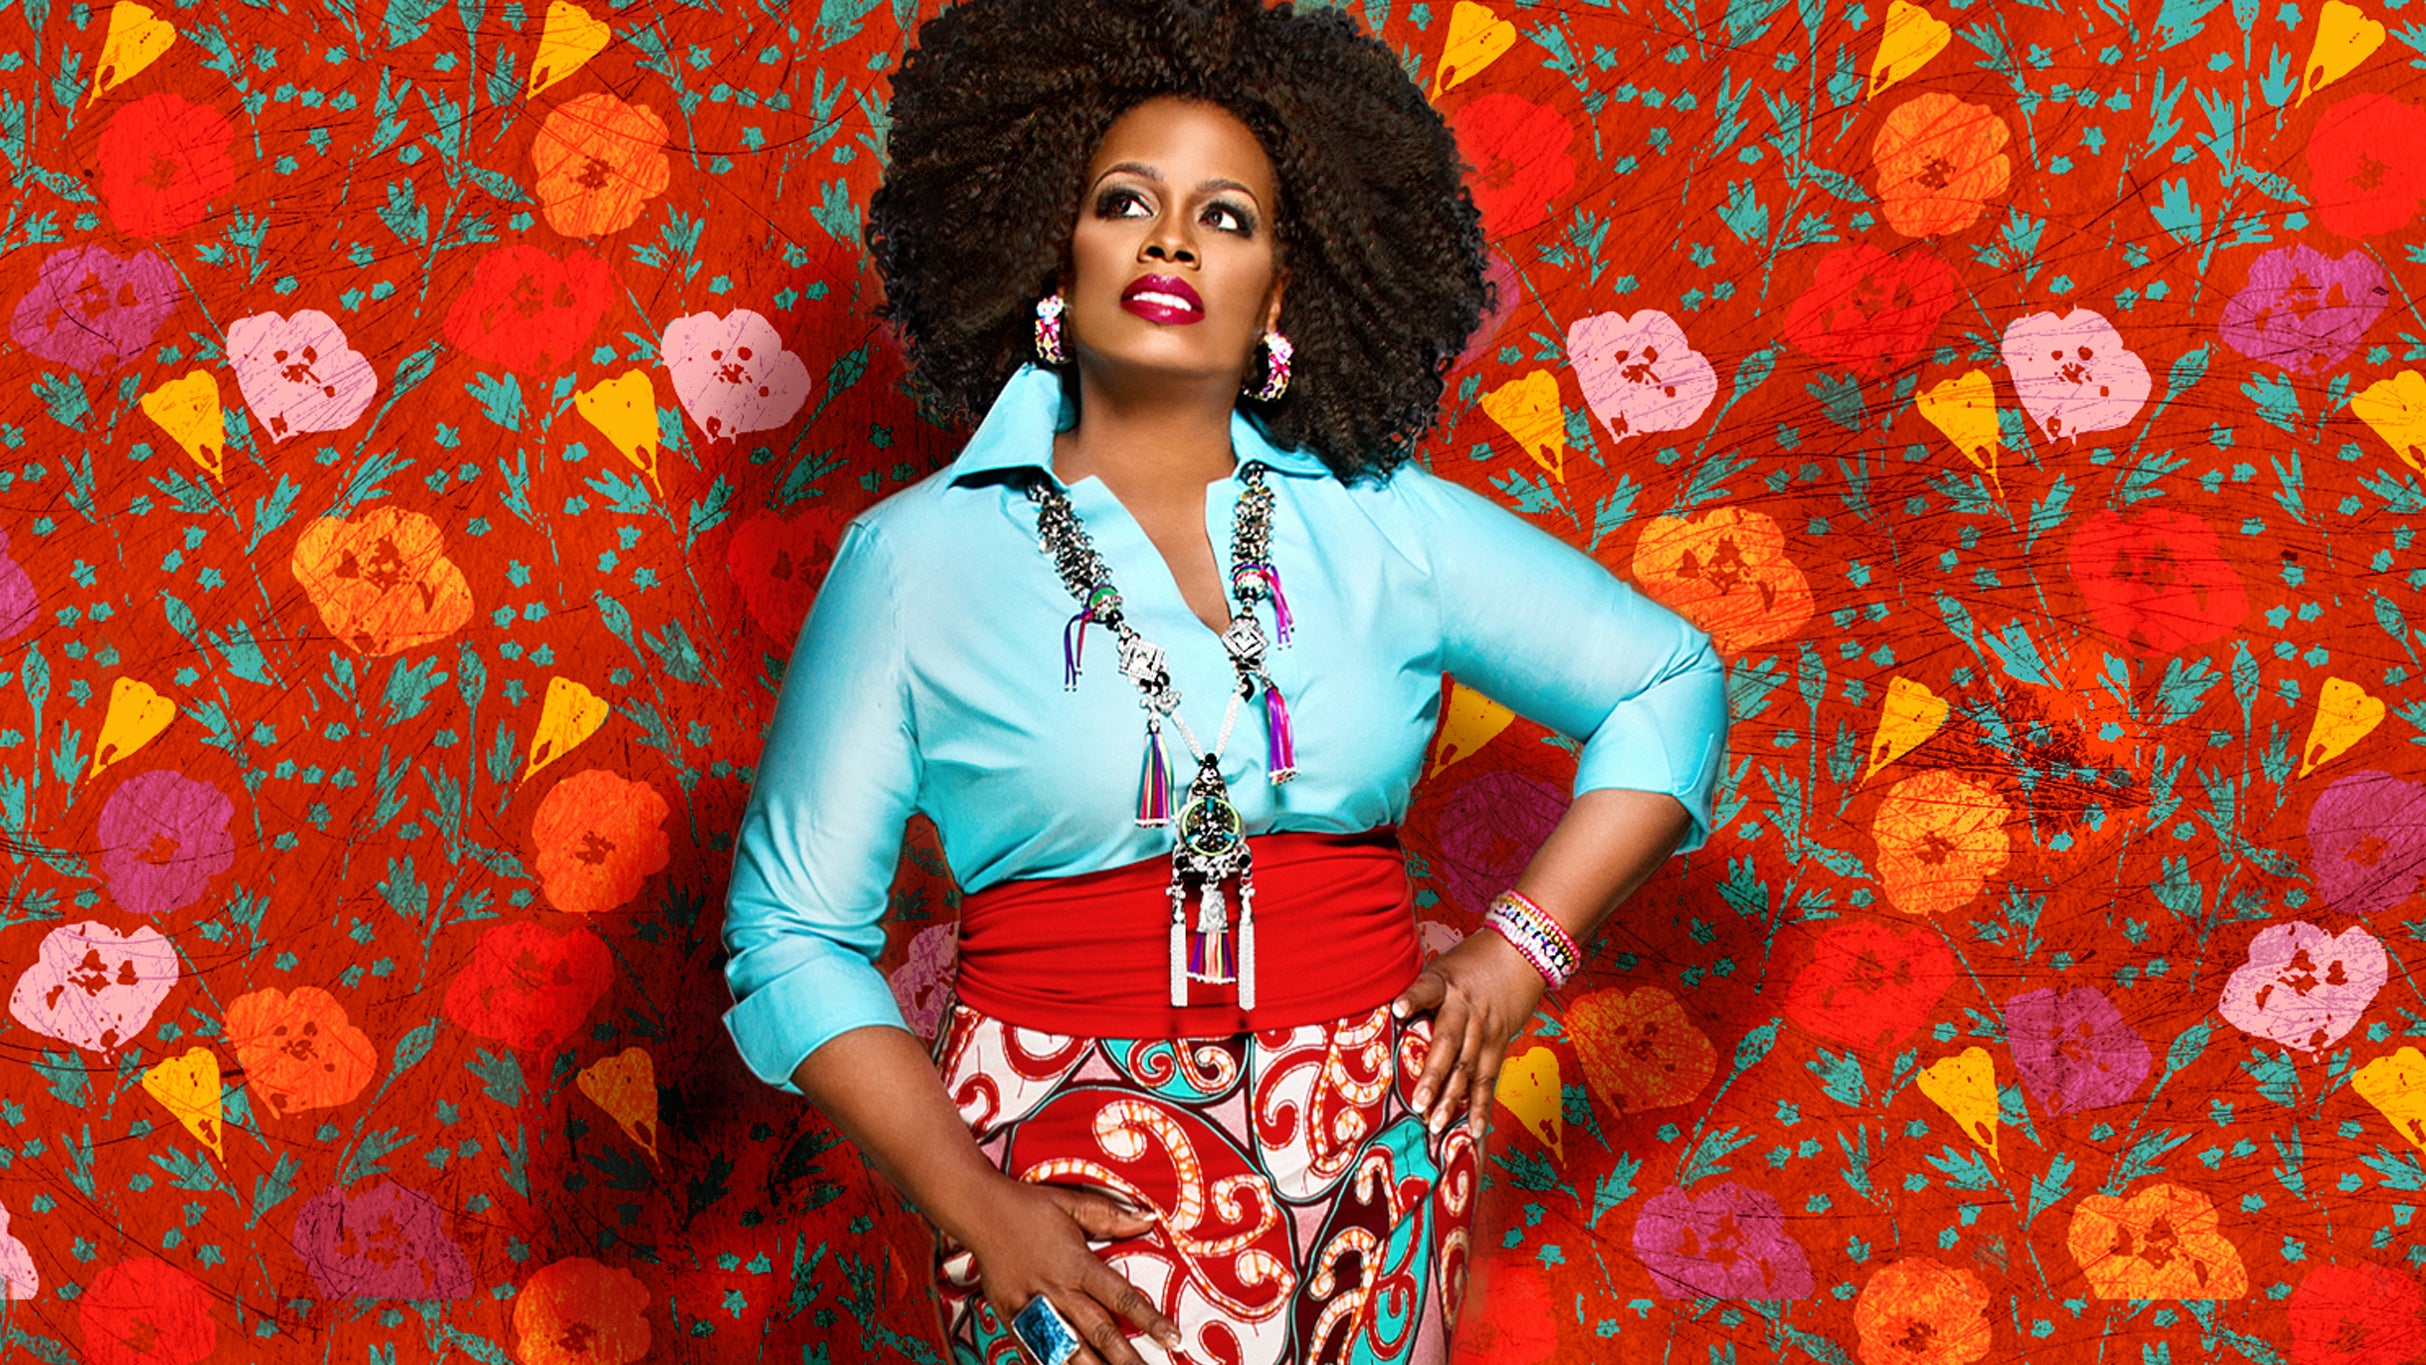 Dianne Reeves w/ Chucho Valdes at Symphony Center-IL